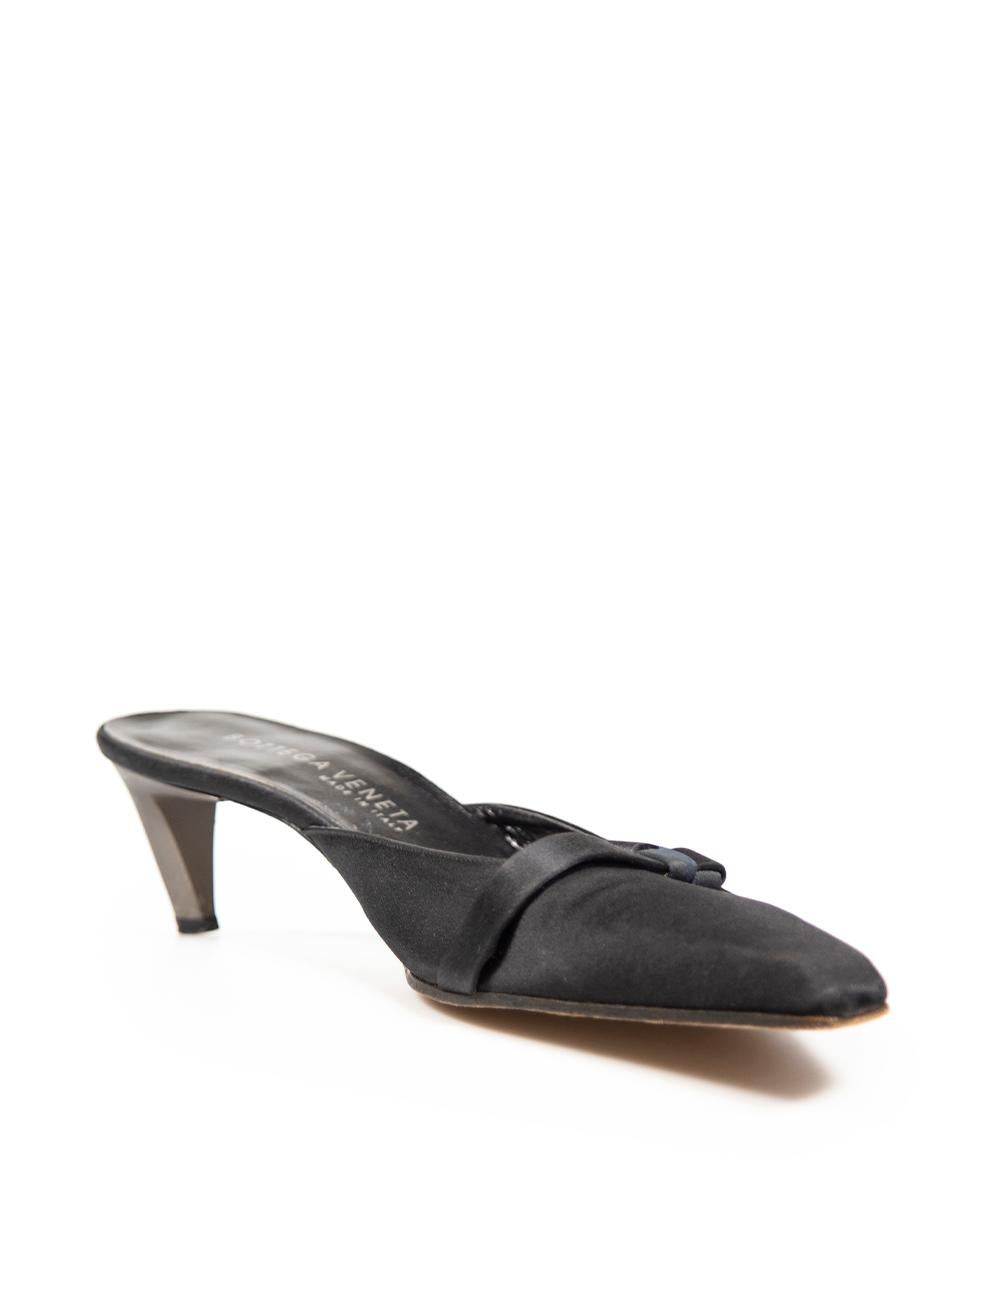 CONDITION is Very good. Minimal wear to shoes is evident. Minimal wear to both uppers with marks to the satin and both shoes also have scratches and indents to the heels on this used Bottega Veneta designer resale item.
 
 Details
 Vintage
 Black
